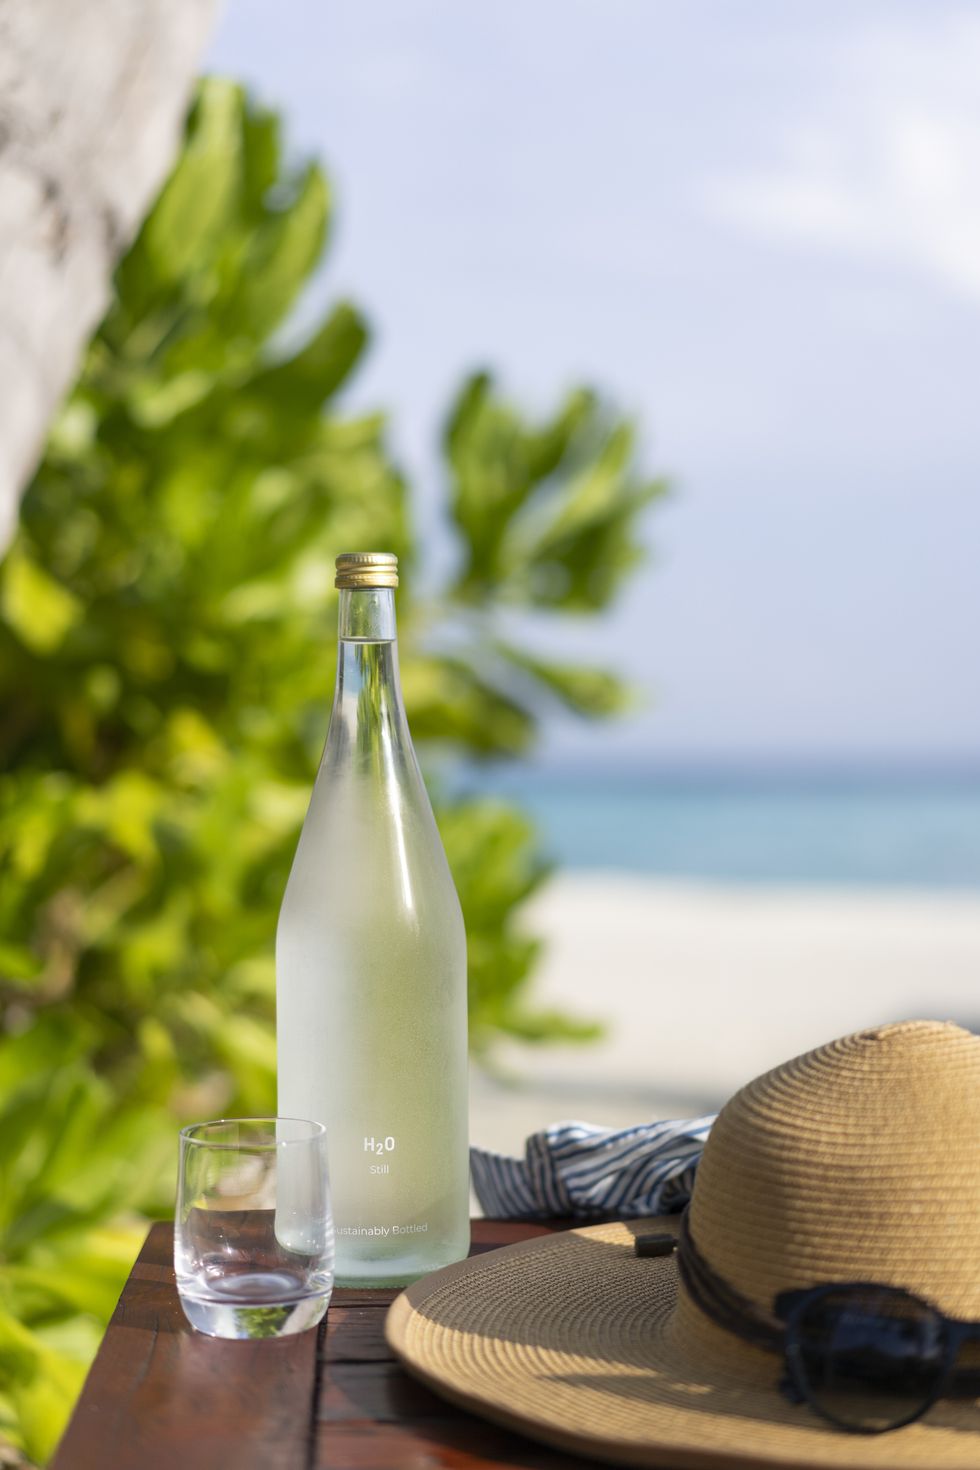 glass bottle of water, straw hat and sun glasses on the background of the beach in the maldives